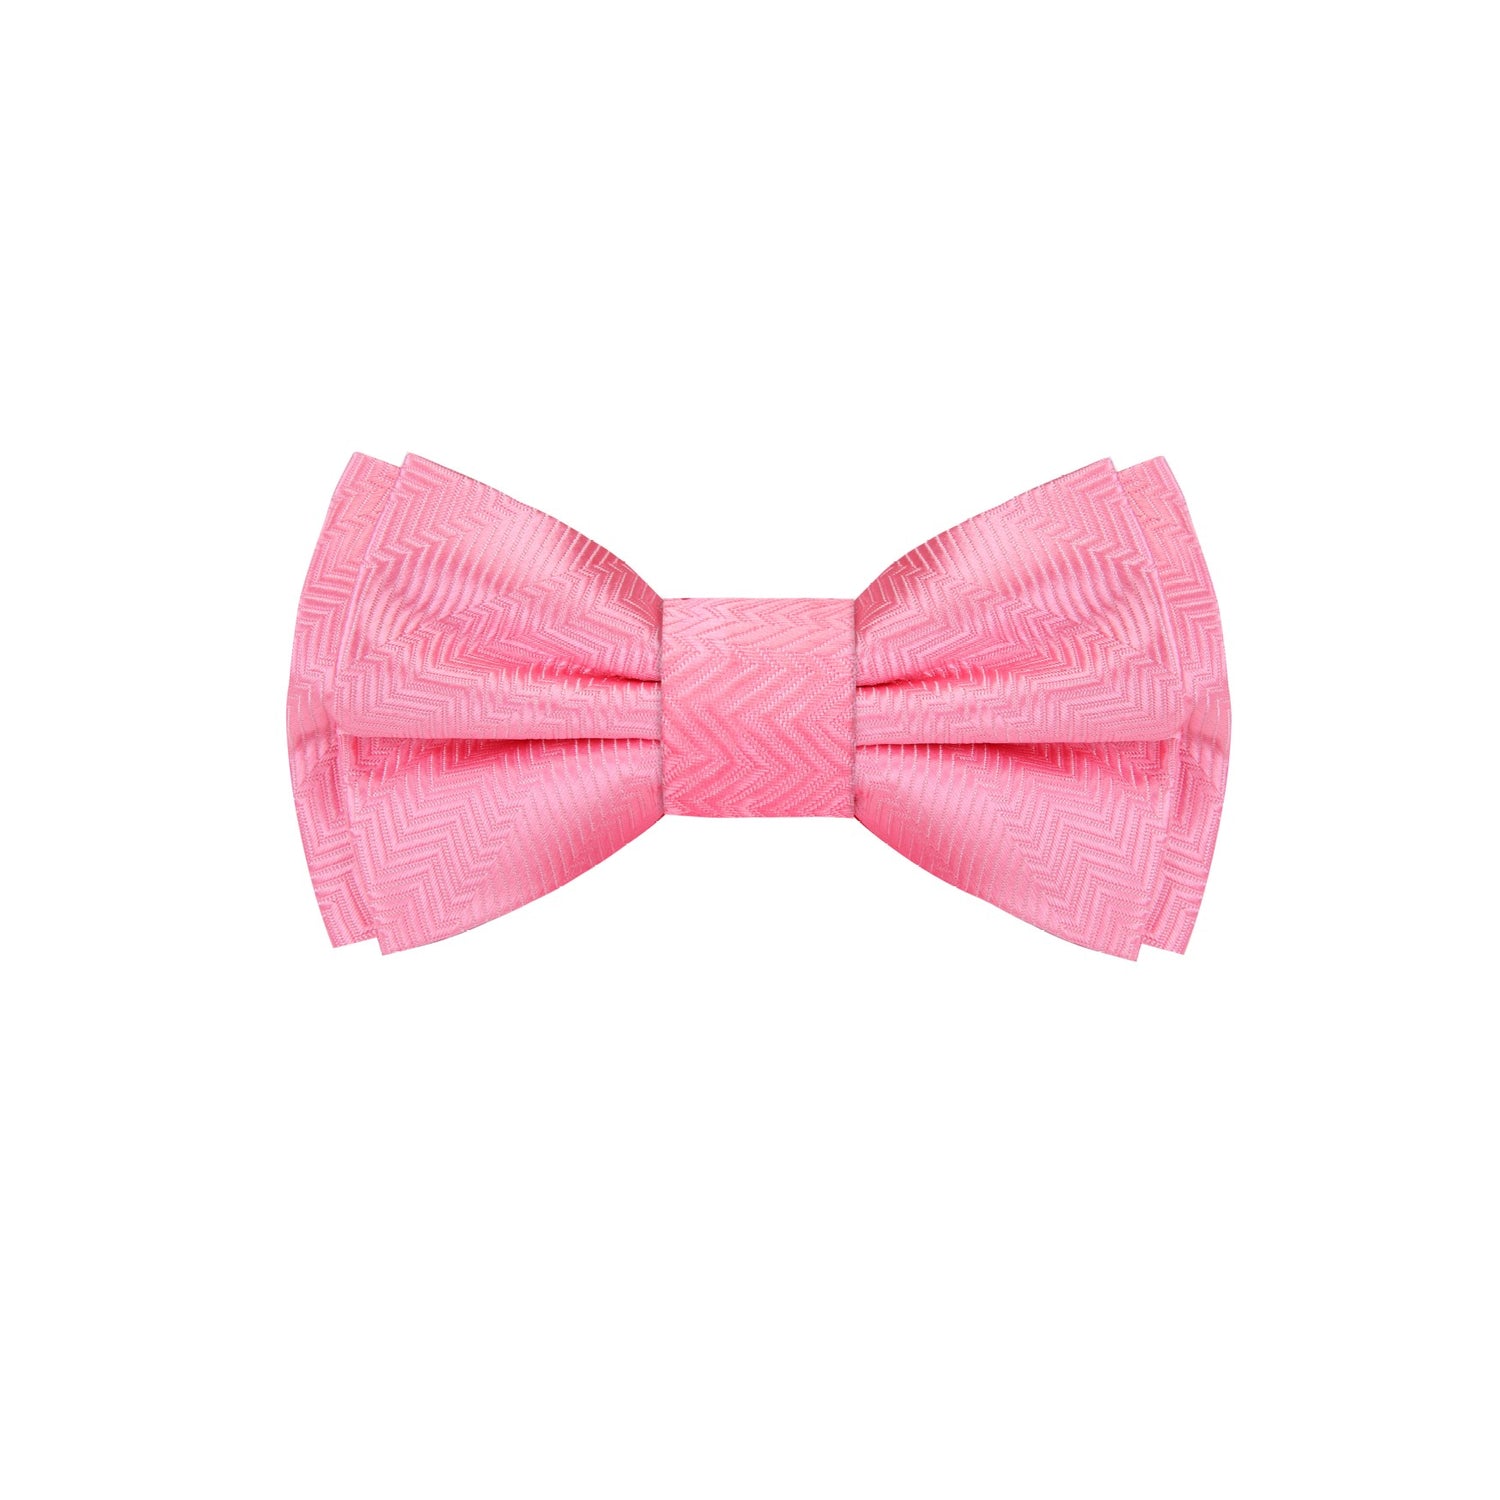 A Light Pink Solid Pattern Self Tie Bow Tie 